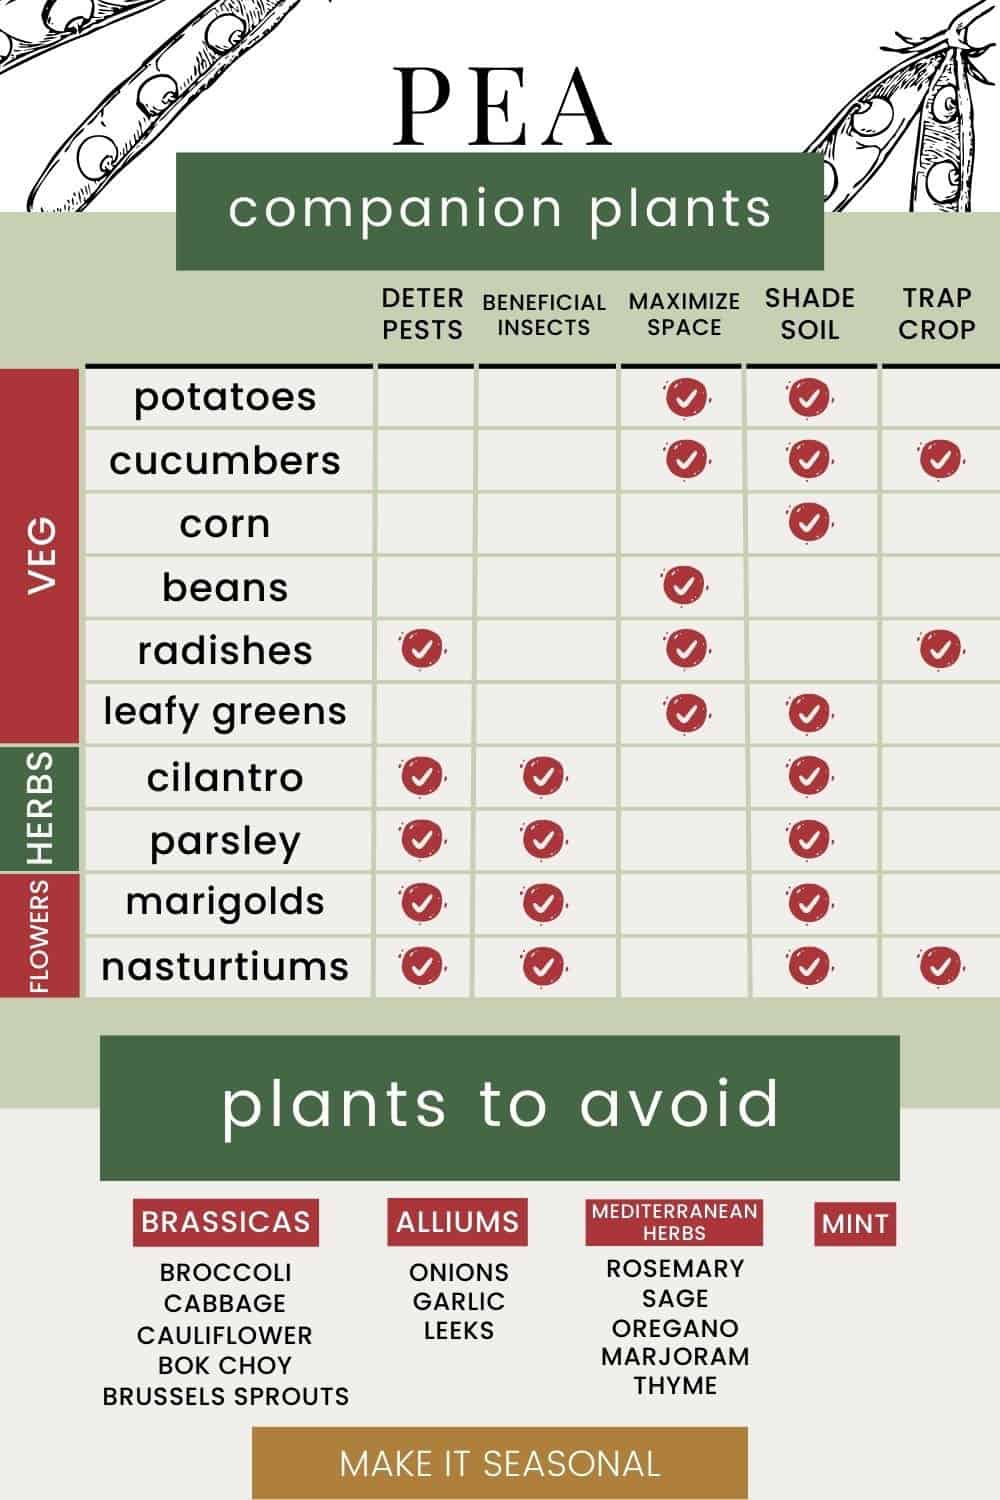 Pea companion planting chart with the best vegetables, herbs, and flowers to plant with peas and what plants to avoid